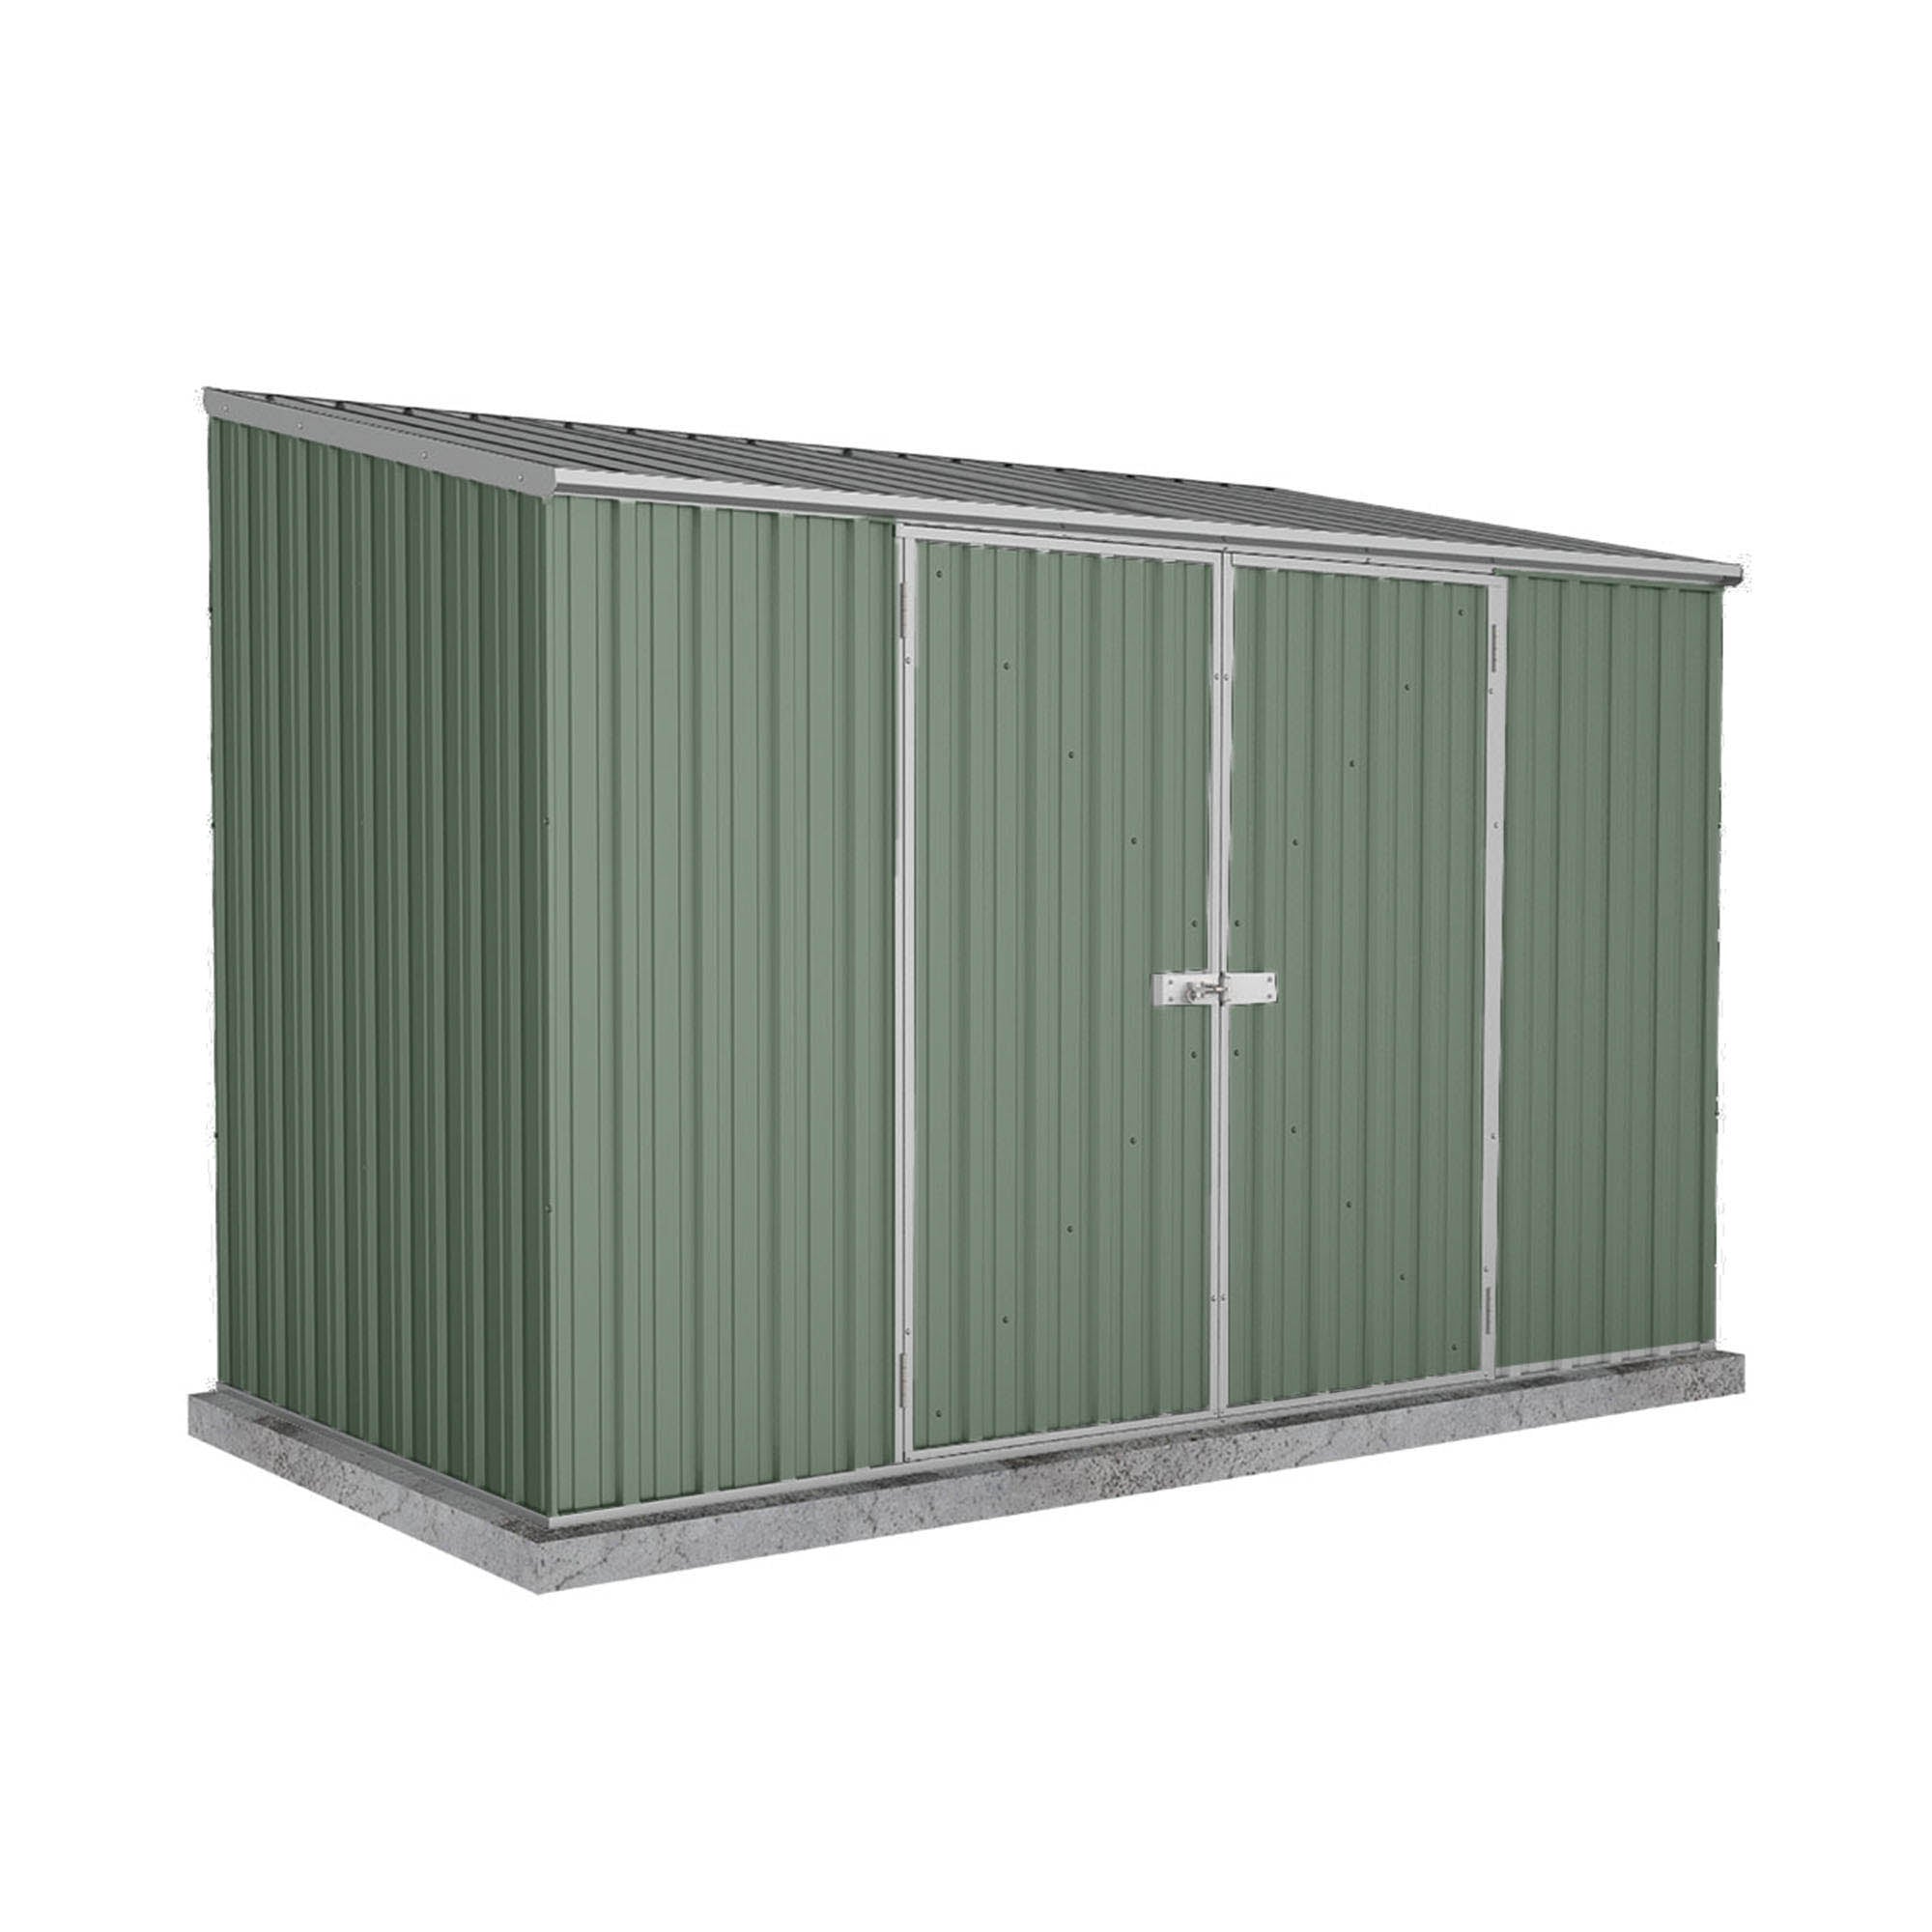 Absco 10 x 5 Pale Eucalyptus Easy Build Pent Metal Shed